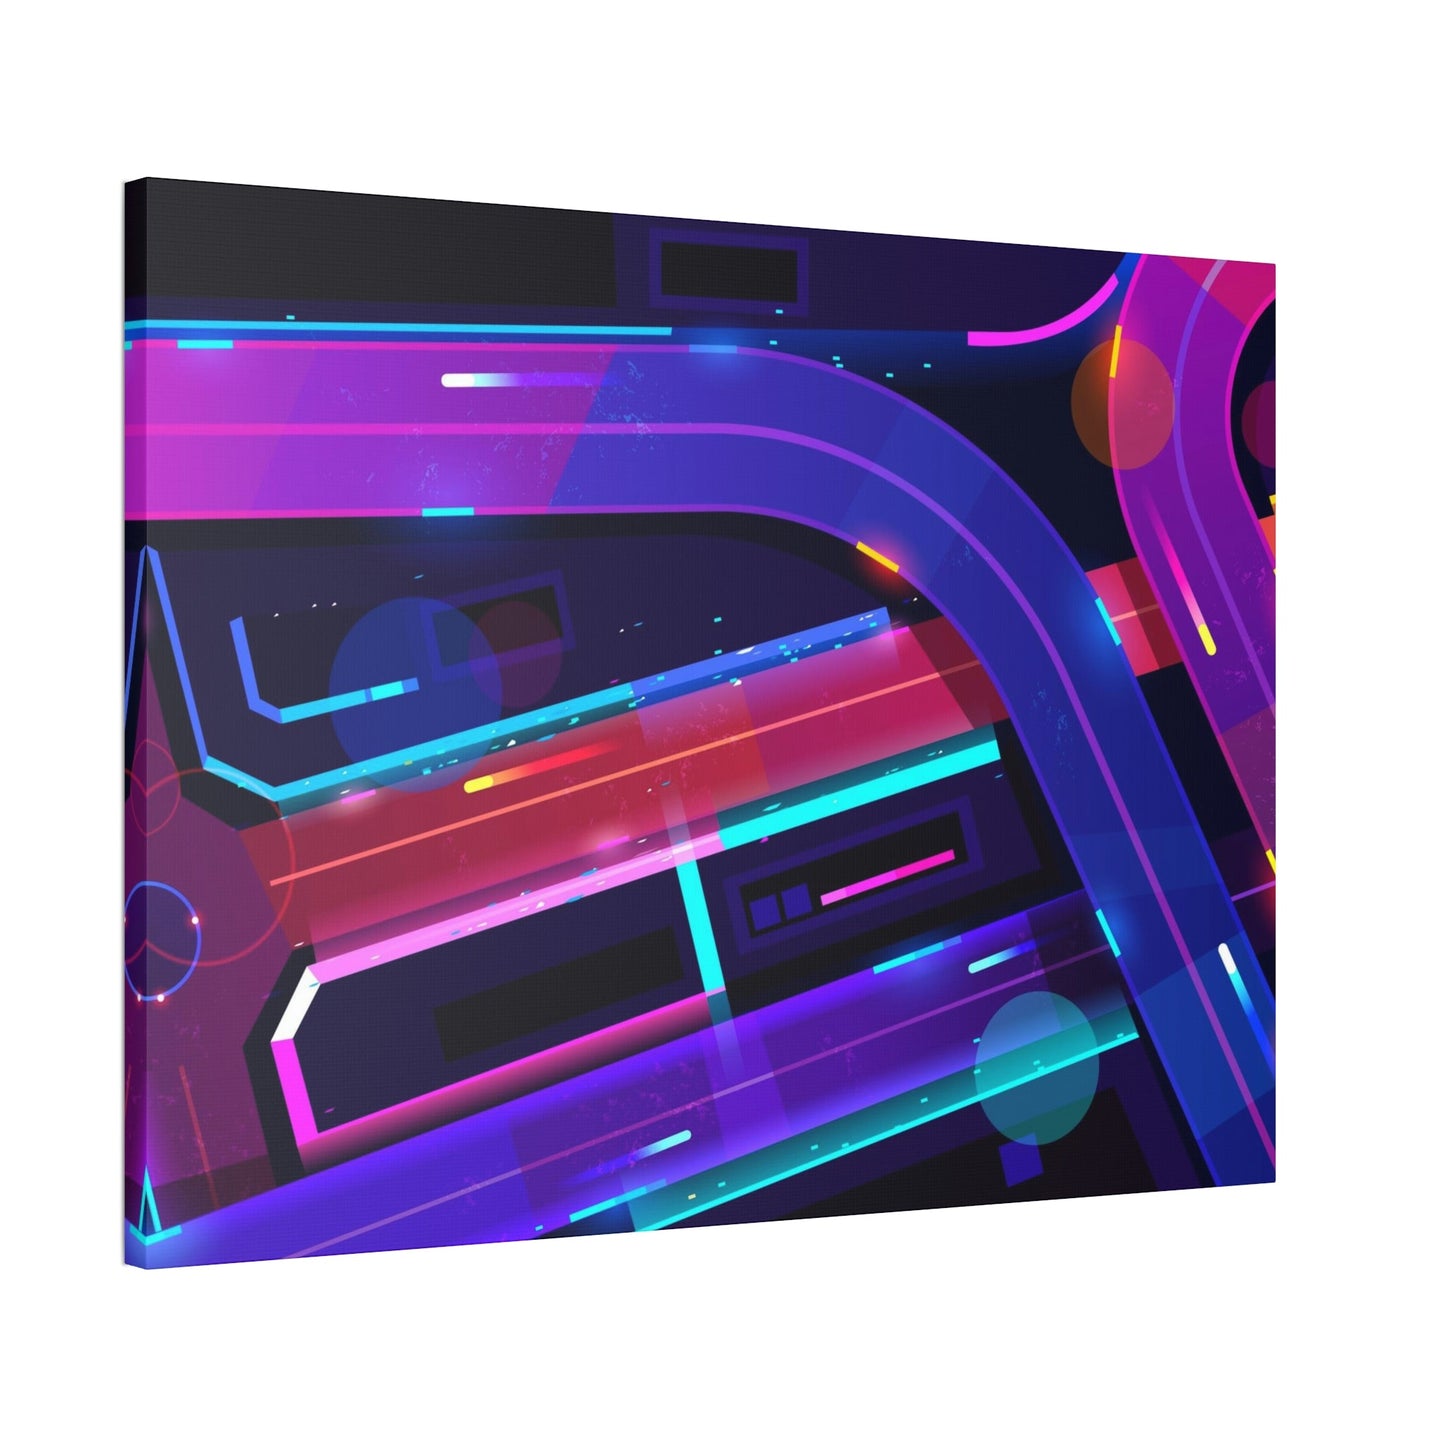 Neon Fantasia: Captivating Framed Poster Art on Premium Canvas for Wall Decor